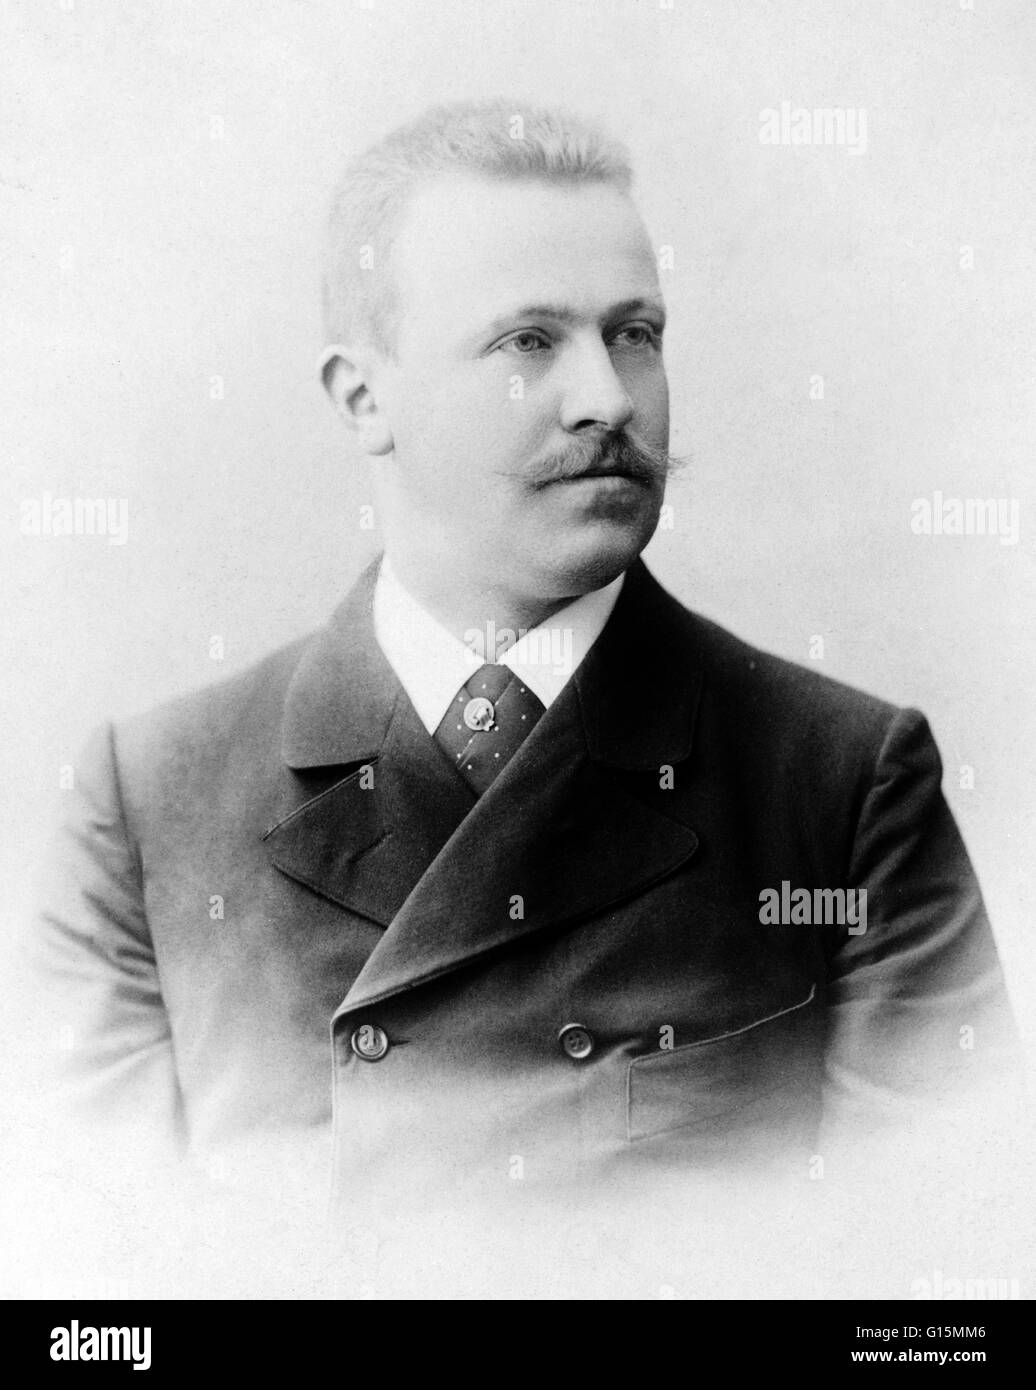 Erich Dagobert von Drygalski (February 9, 1865 - January 10, 1949) was a German geographer, geophysicist and polar scientist. He led two expeditions between 1891 and 1893, which were supplied by the Society for Geoscience of Berlin. One expedition wintere Stock Photo